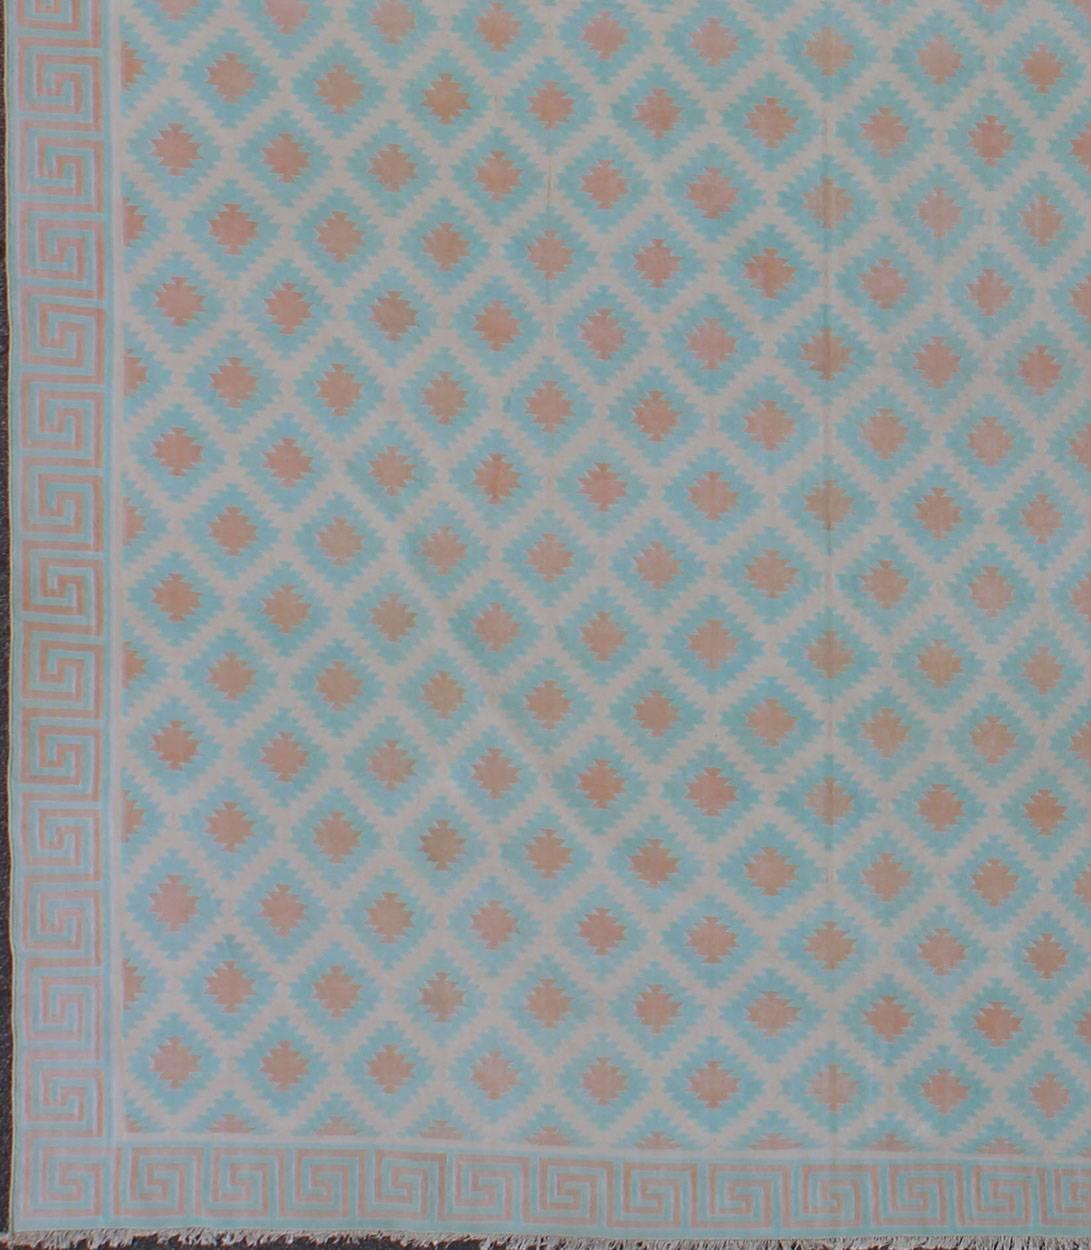 
Large Vintage Decorative Indian Cotton Dhurrie, Collection of Thomas Britt
Woven during the mid-20th century, this designer cotton dhurrie is decorated with a stepped diamond pattern rendered with an inventive low-contrast color palette. This